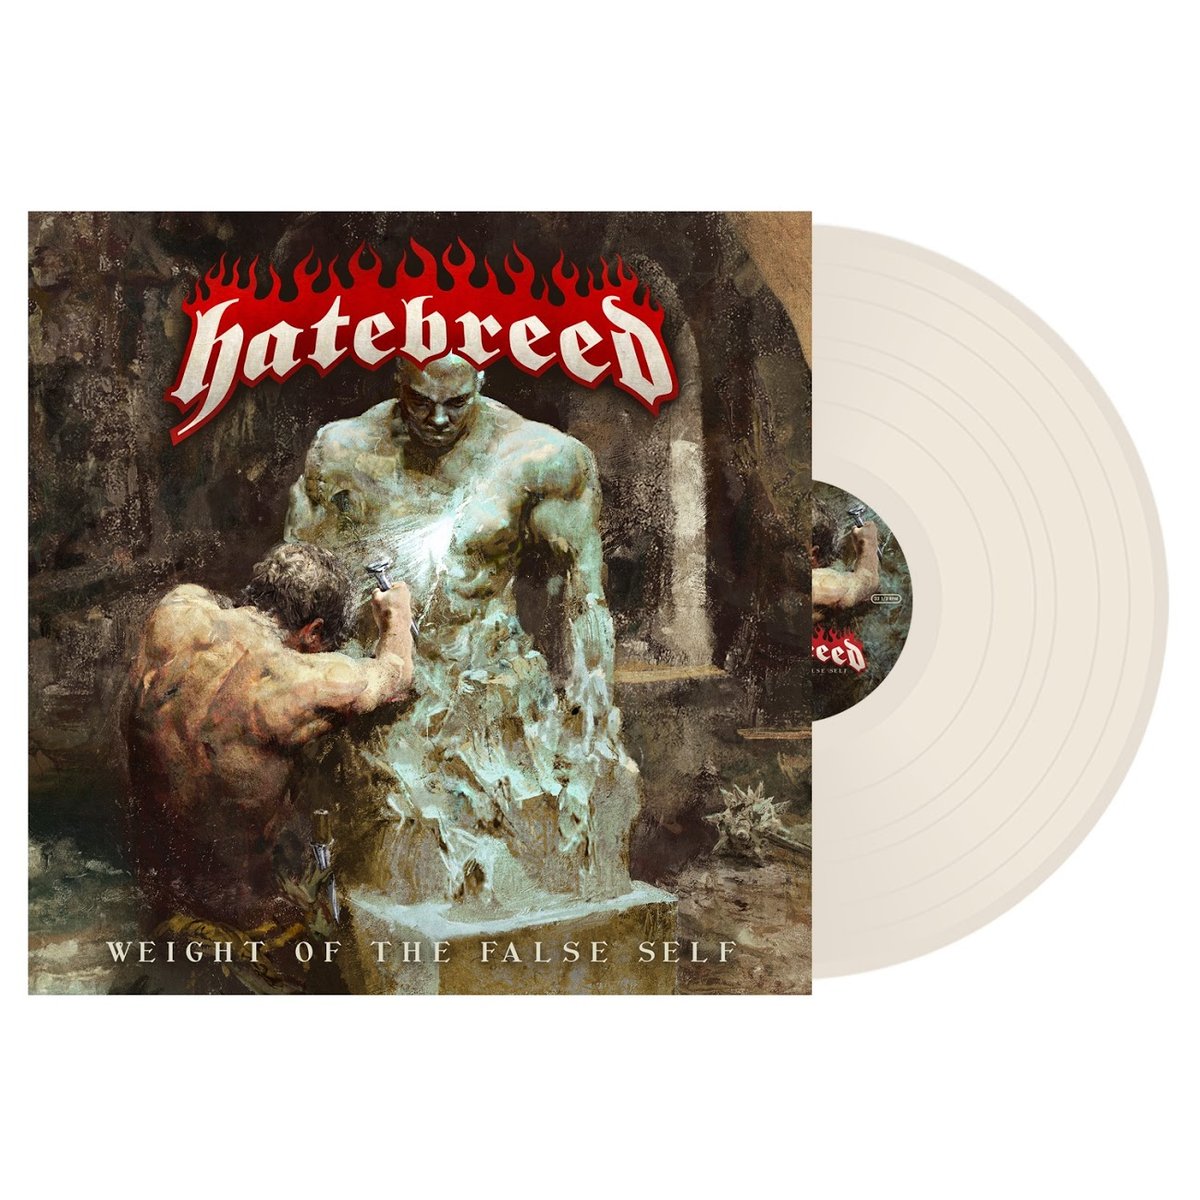 Image of Hatebreed “Weight of the False Self” LP Bone colored Limited to 200 pre-sale